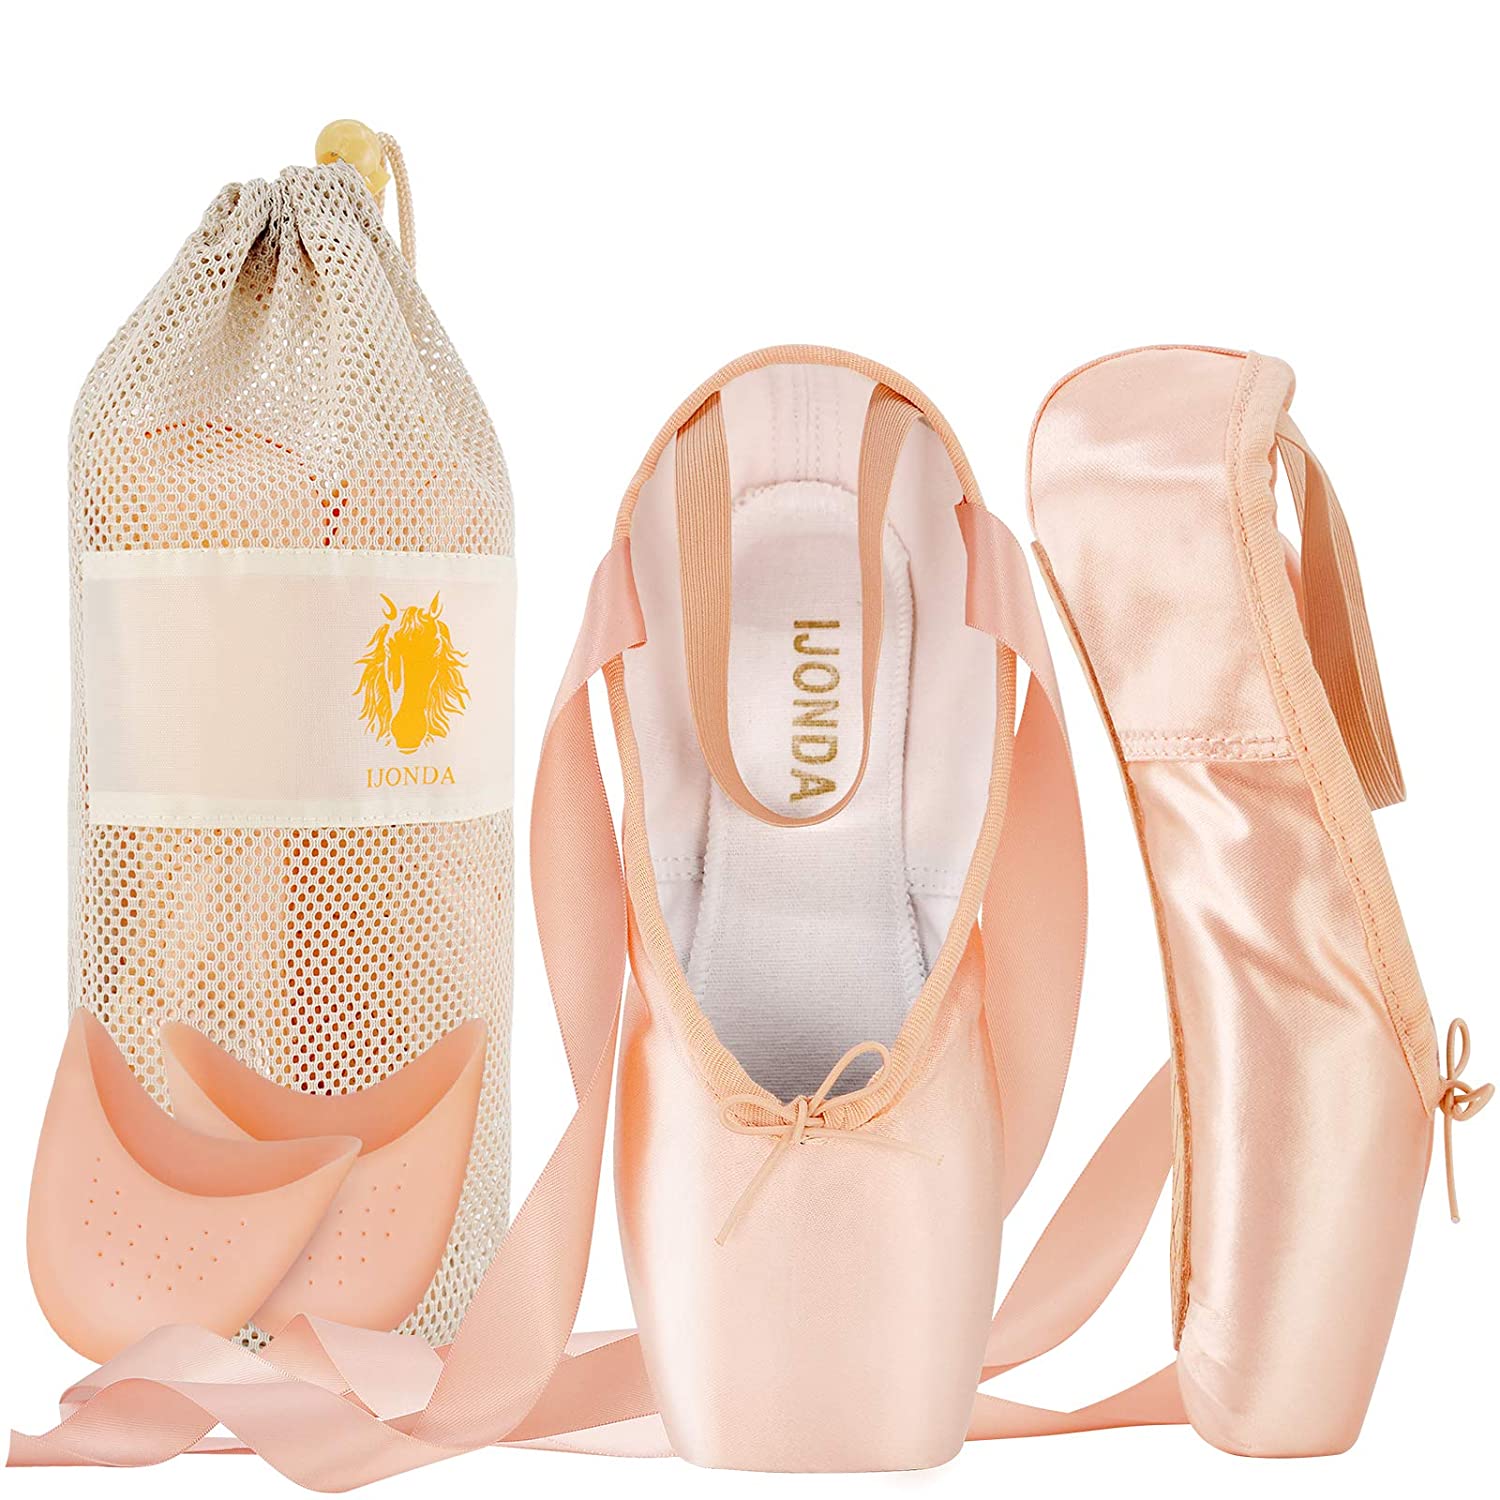 Buy IJONDA Professional Ballet Pointe Shoes for Womens Pink Satin ...